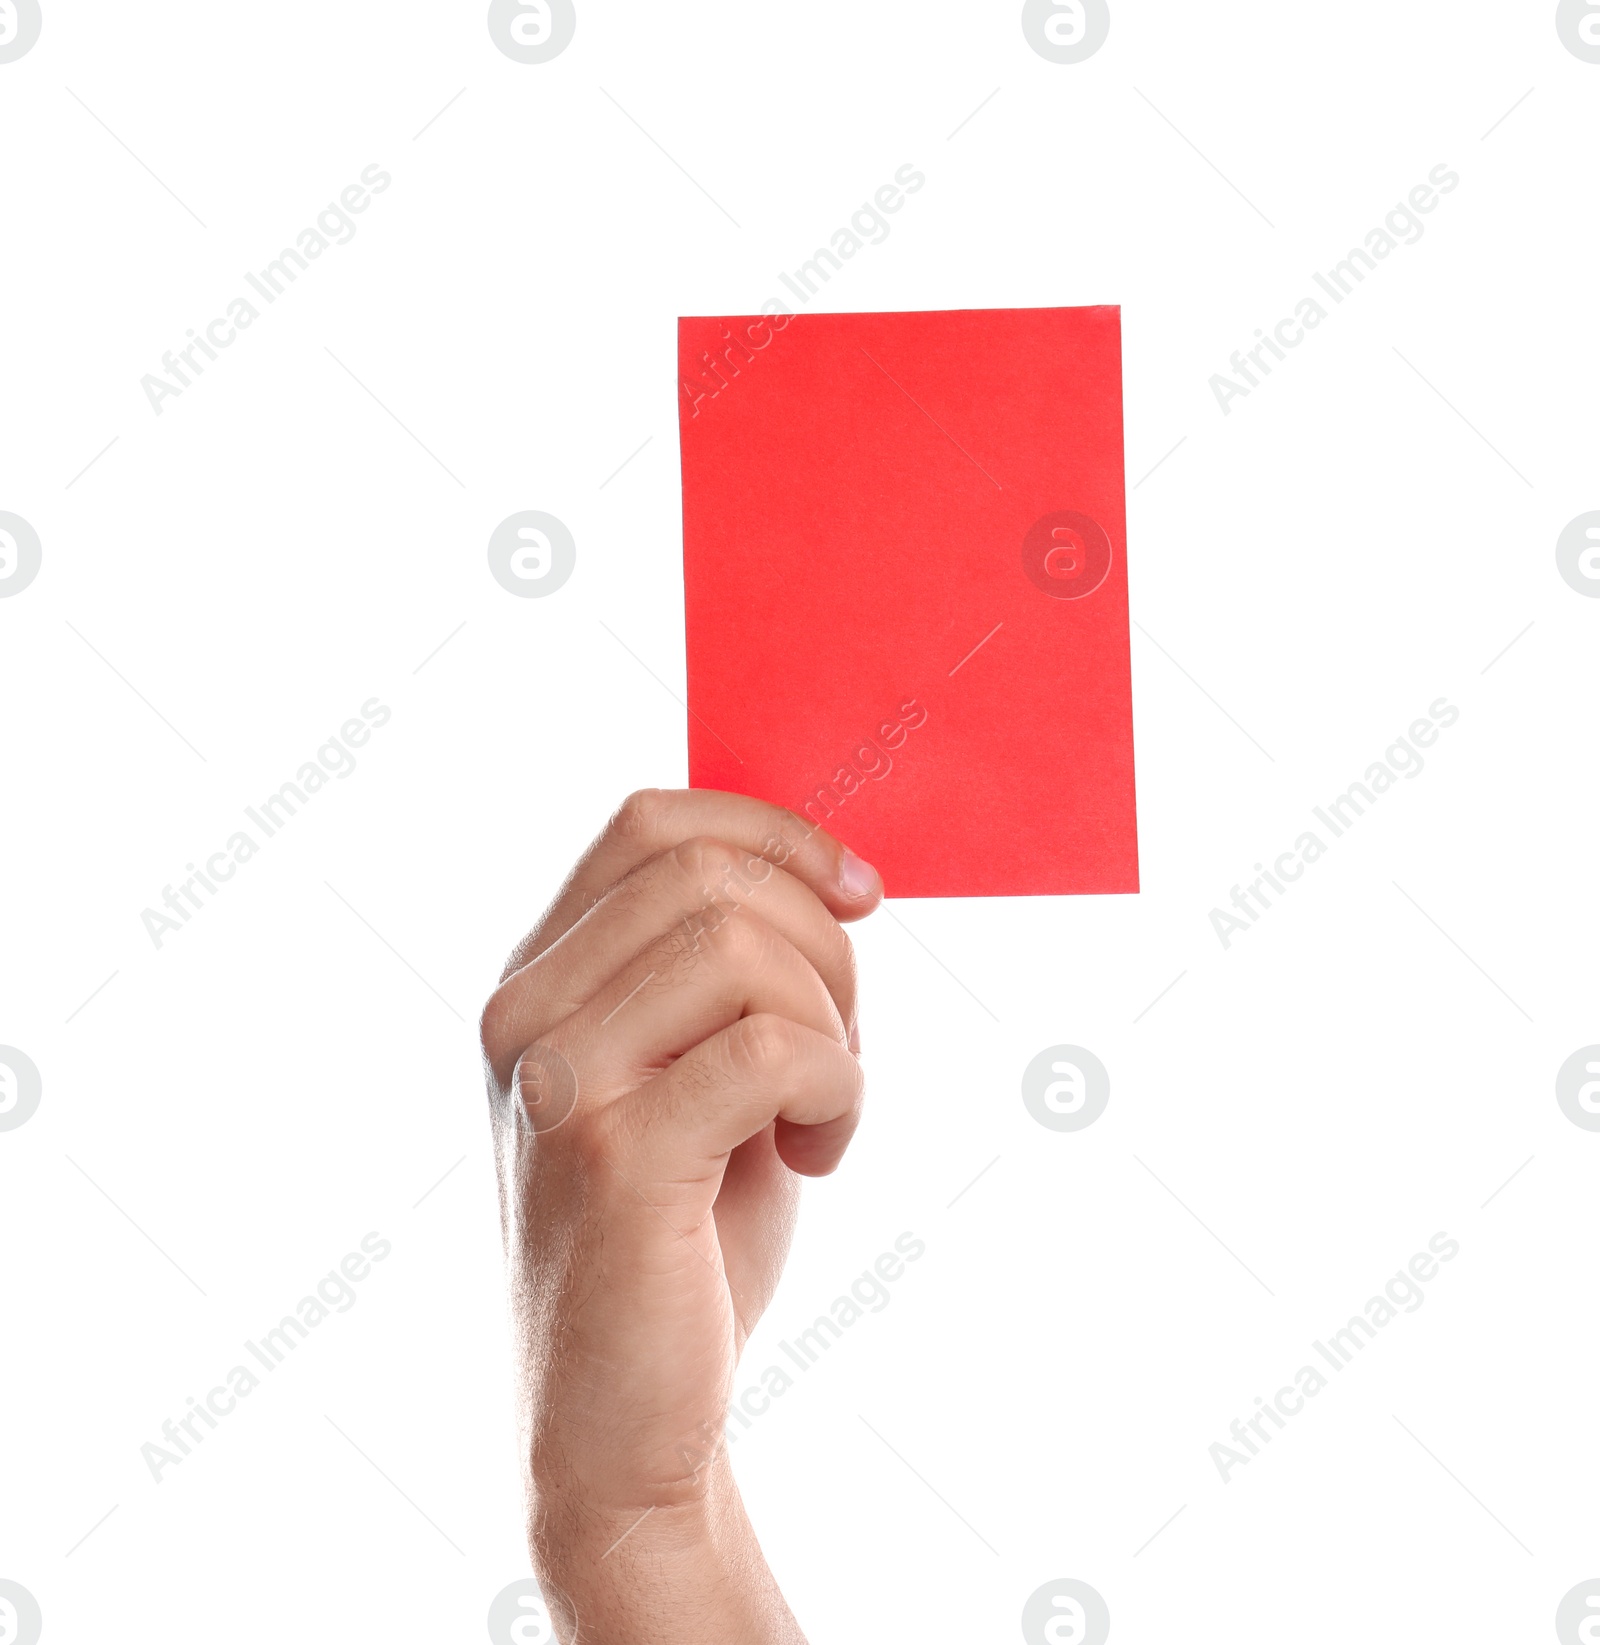 Photo of Football referee holding red card on white background, closeup